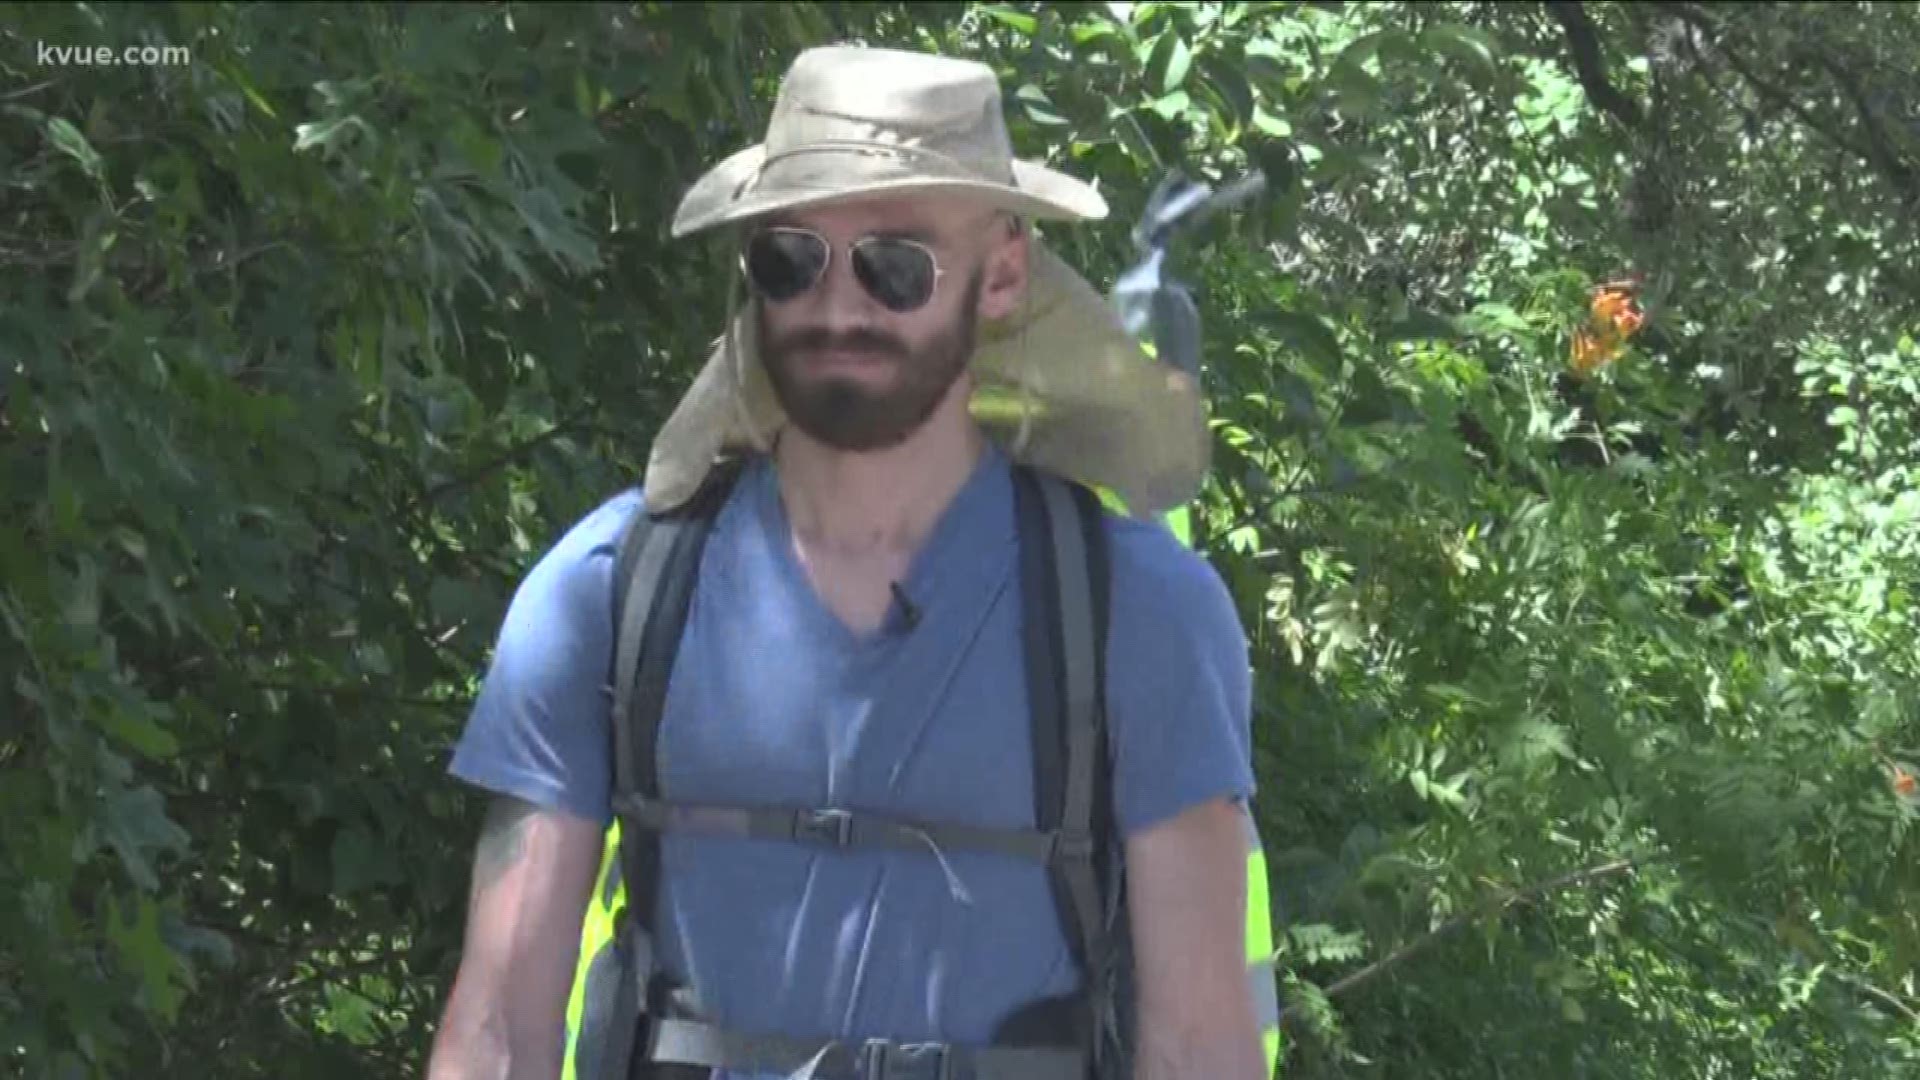 A Central Texas veteran is walking for four days straight. He said he's on a journey to find forgiveness and raise awareness about mental health.